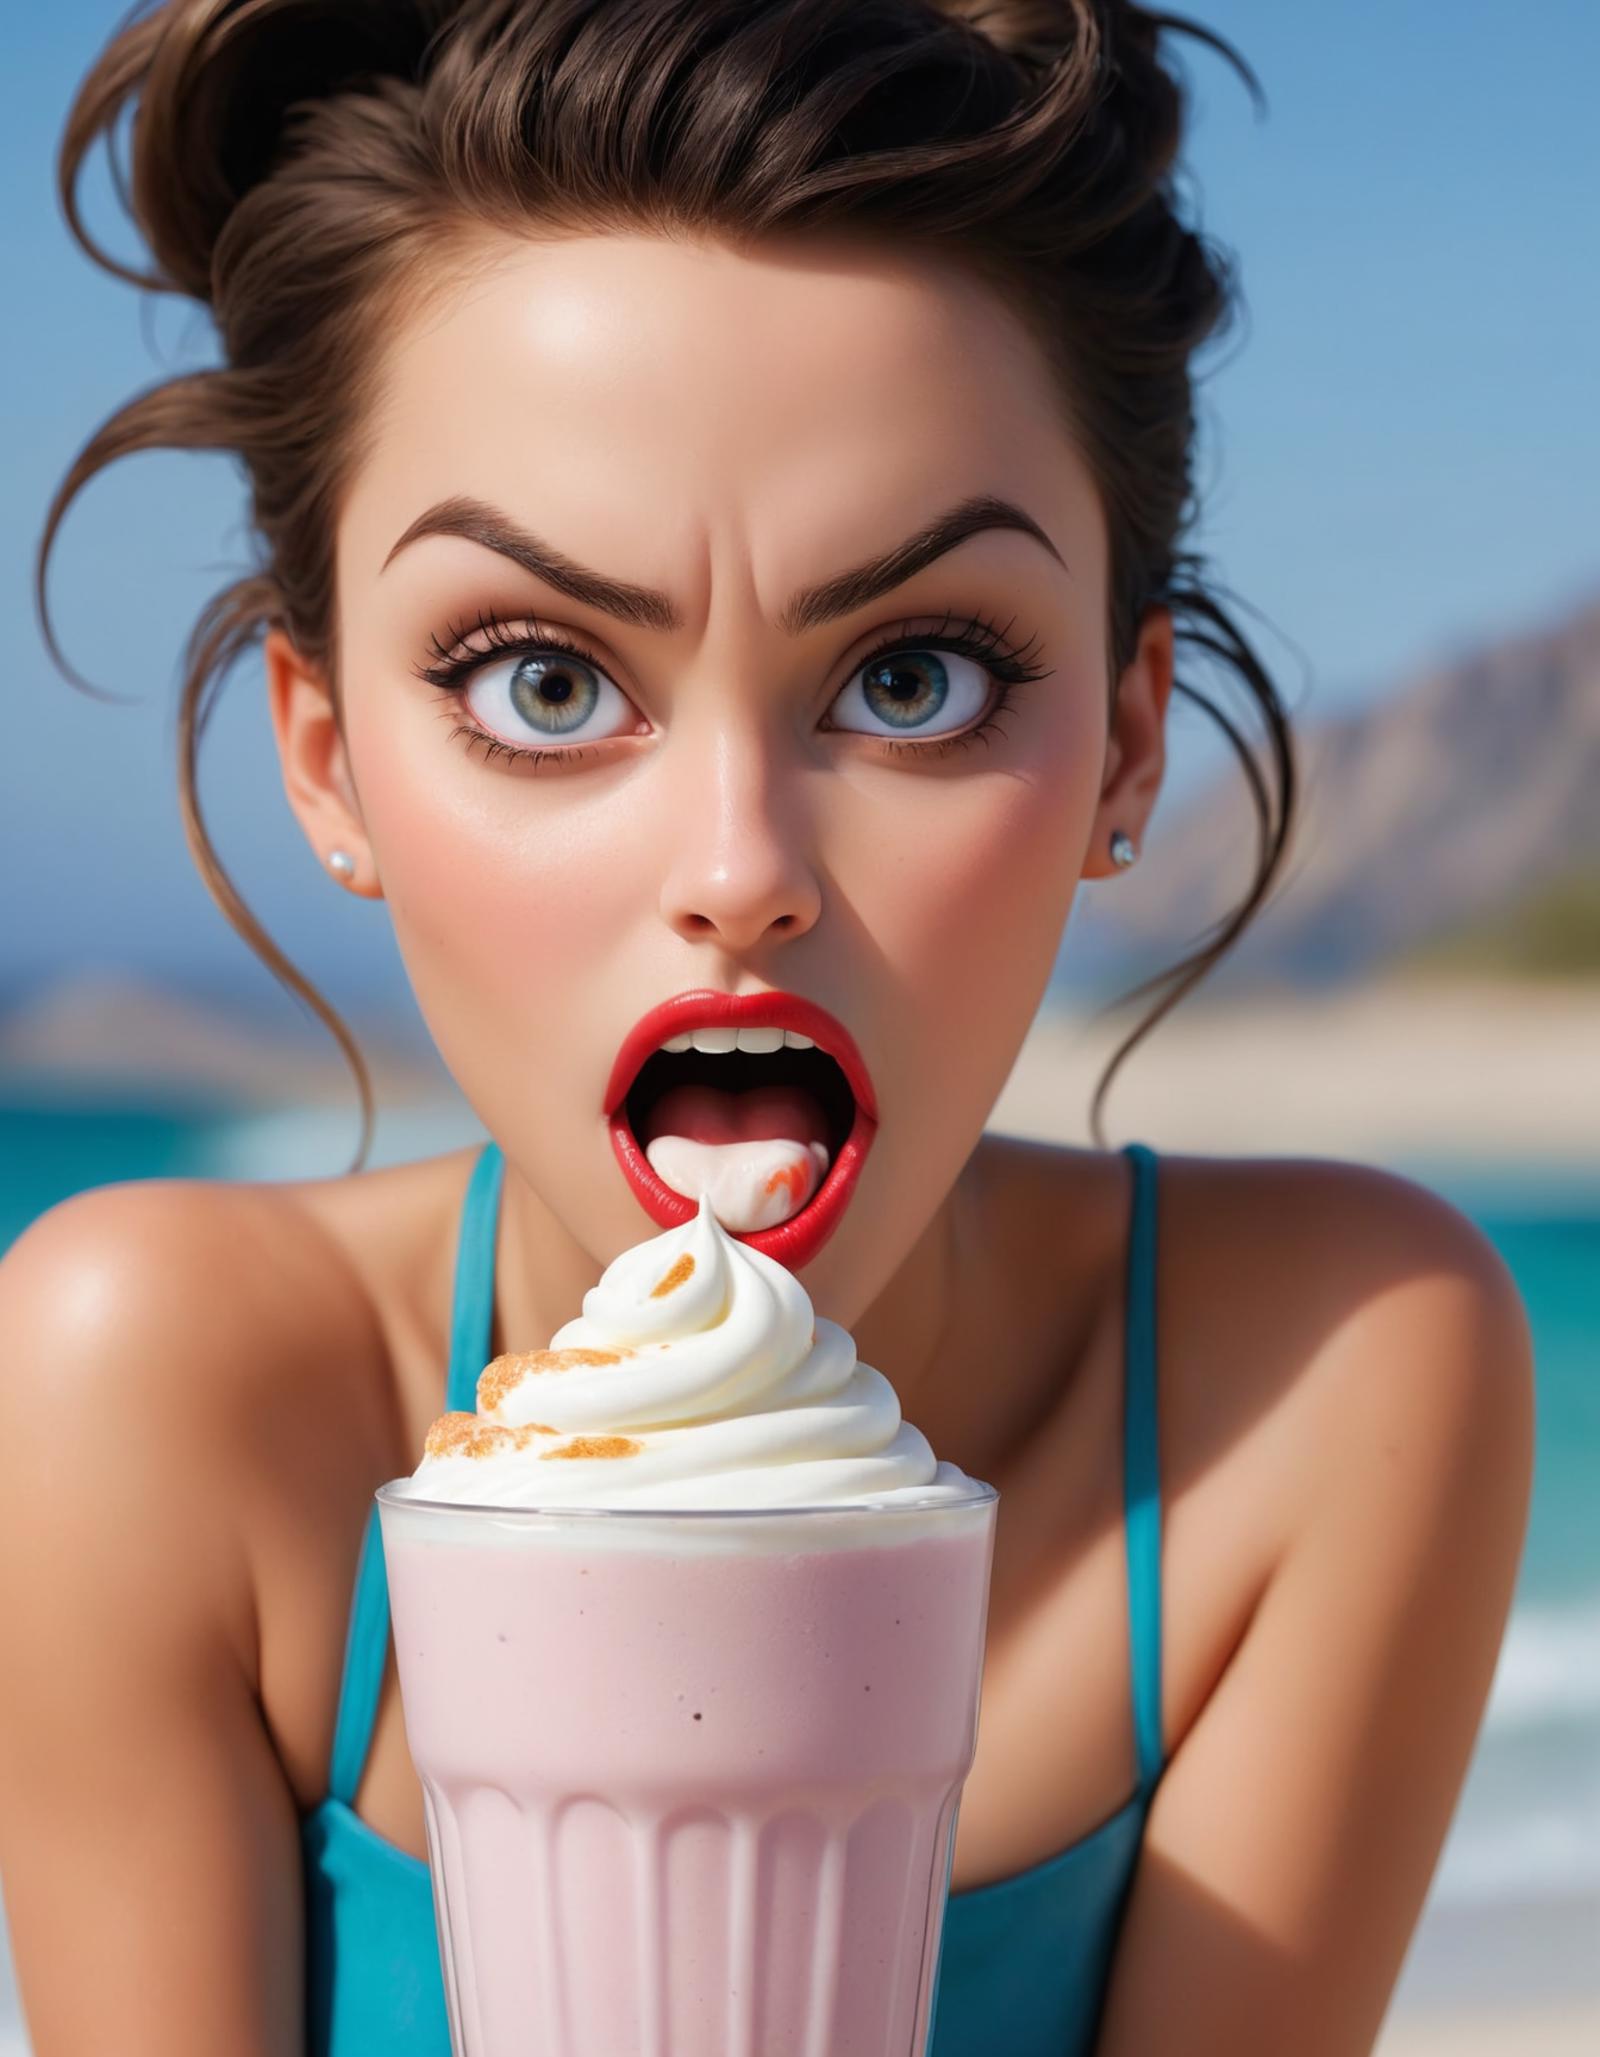 A Woman in a Blue Tank Top Eating Ice Cream with Whipped Cream on a Beach